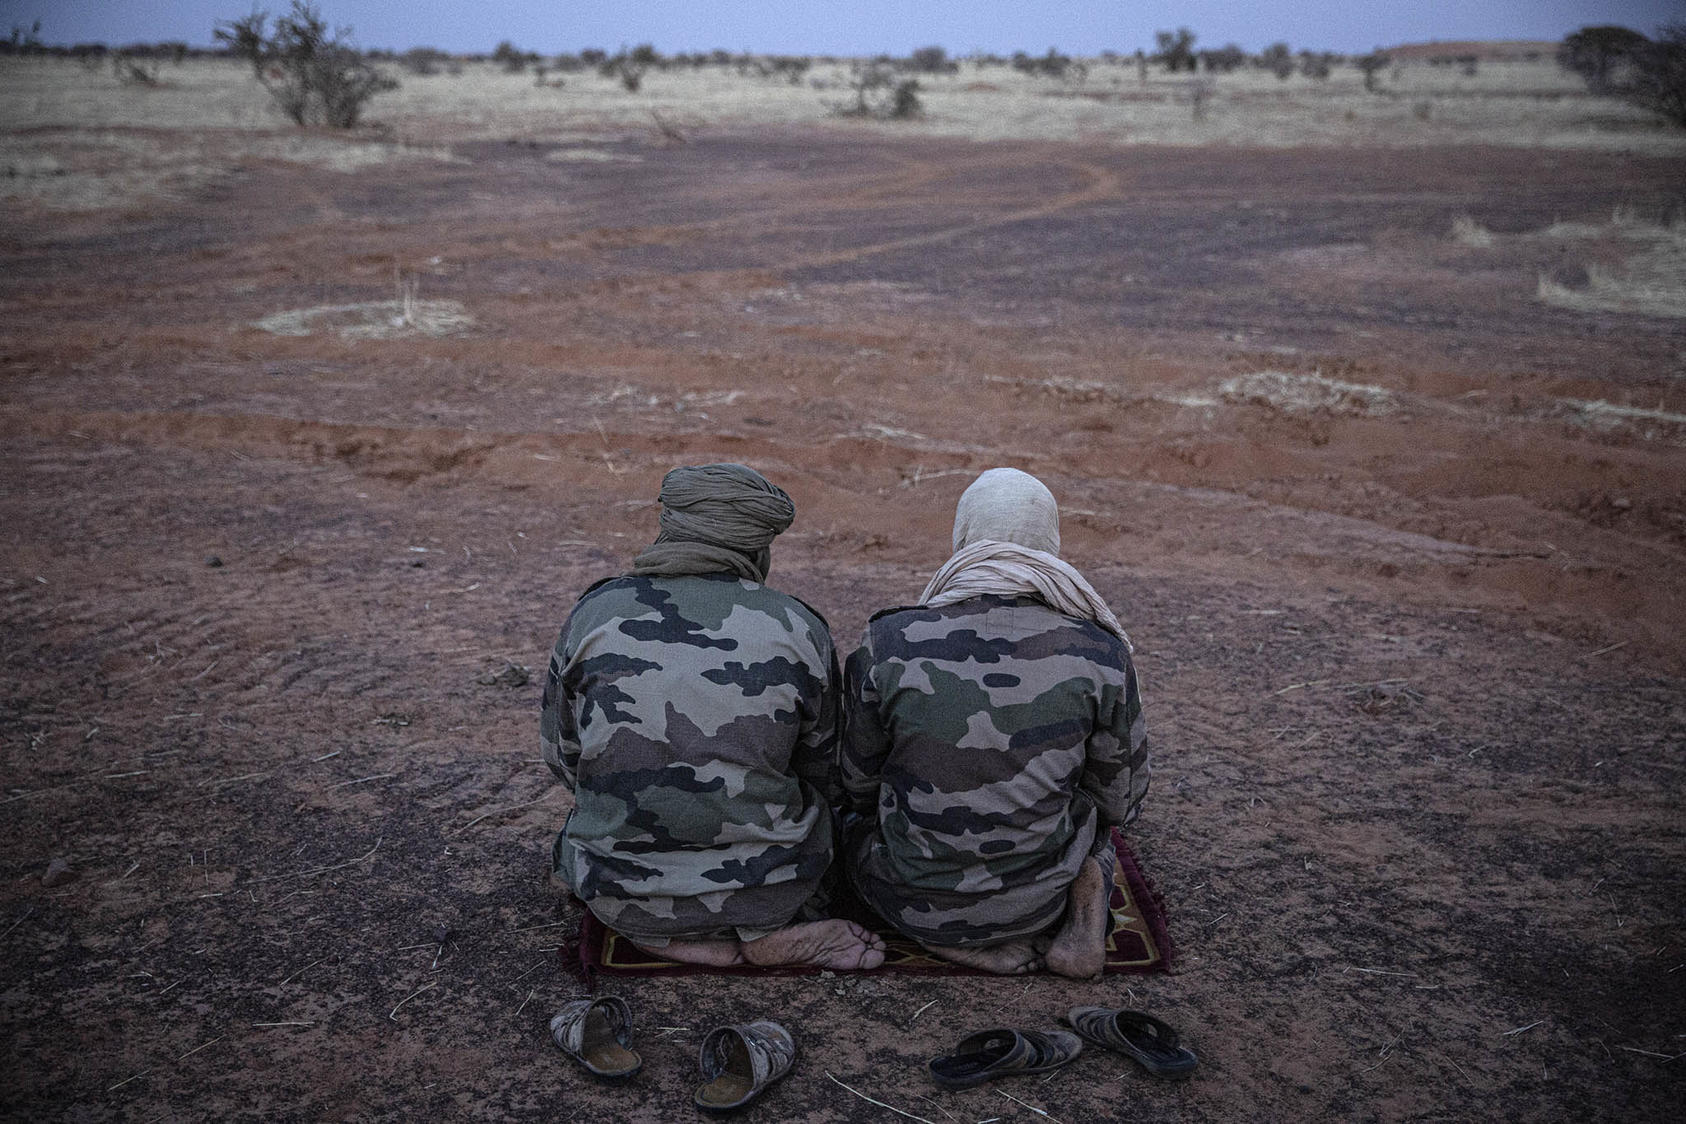 Malian soldiers working alongside French troops during counterterrorism operations in northeastern Mali in February 2020. (Finbarr O'Reilly/The New York Times)